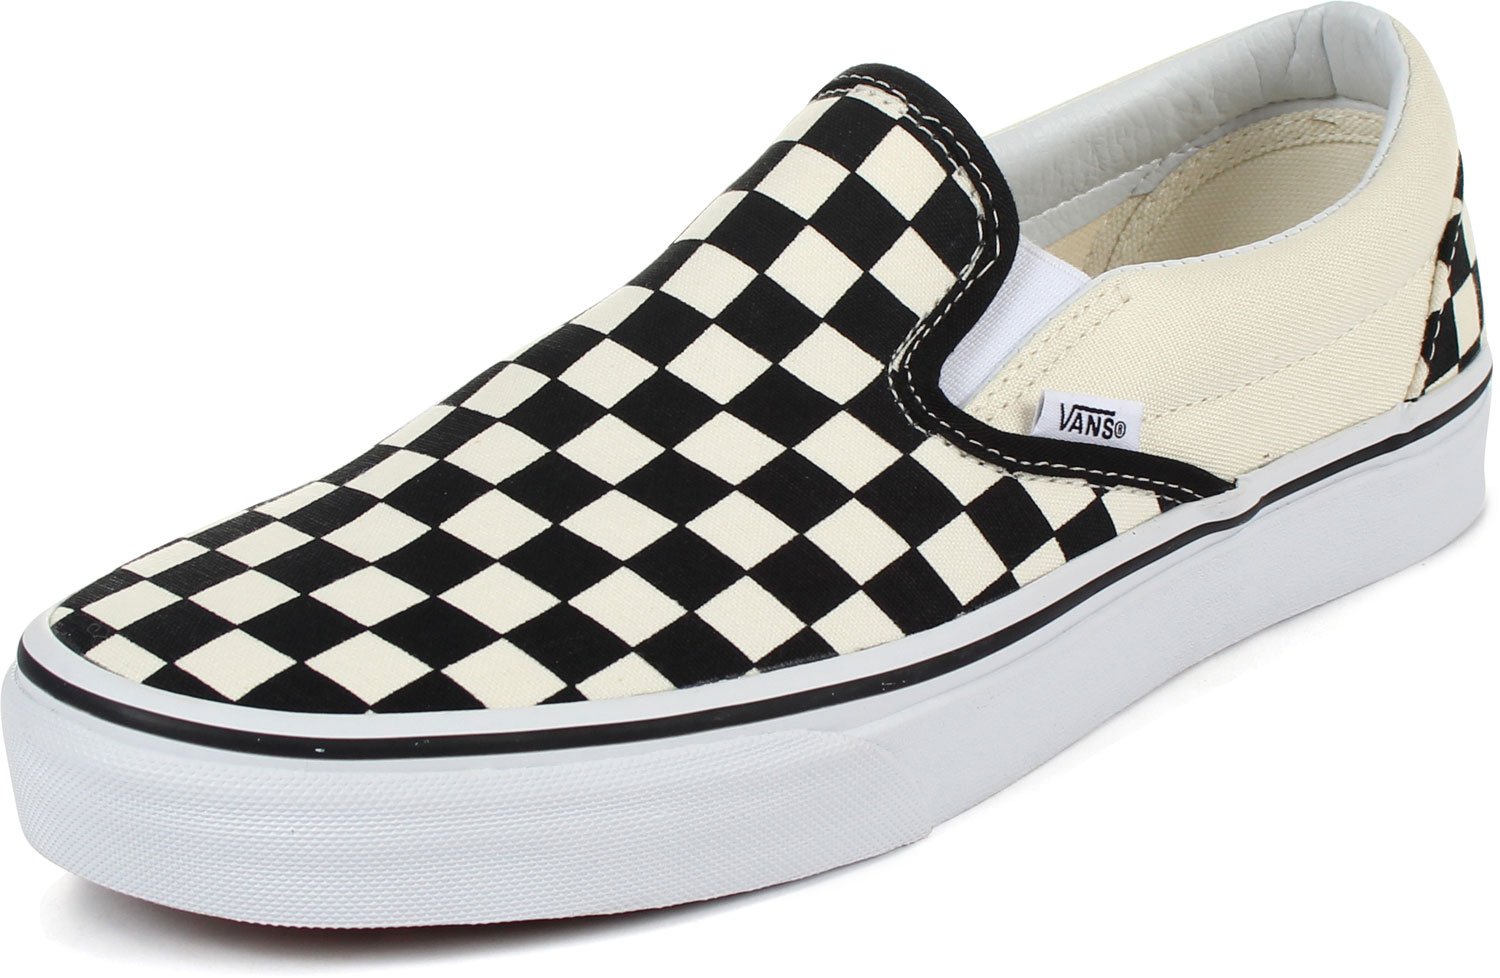 Vans Old Skool Black & White Lifestyle | Mens vans shoes, Leather shoes  woman, Sneakers fashion